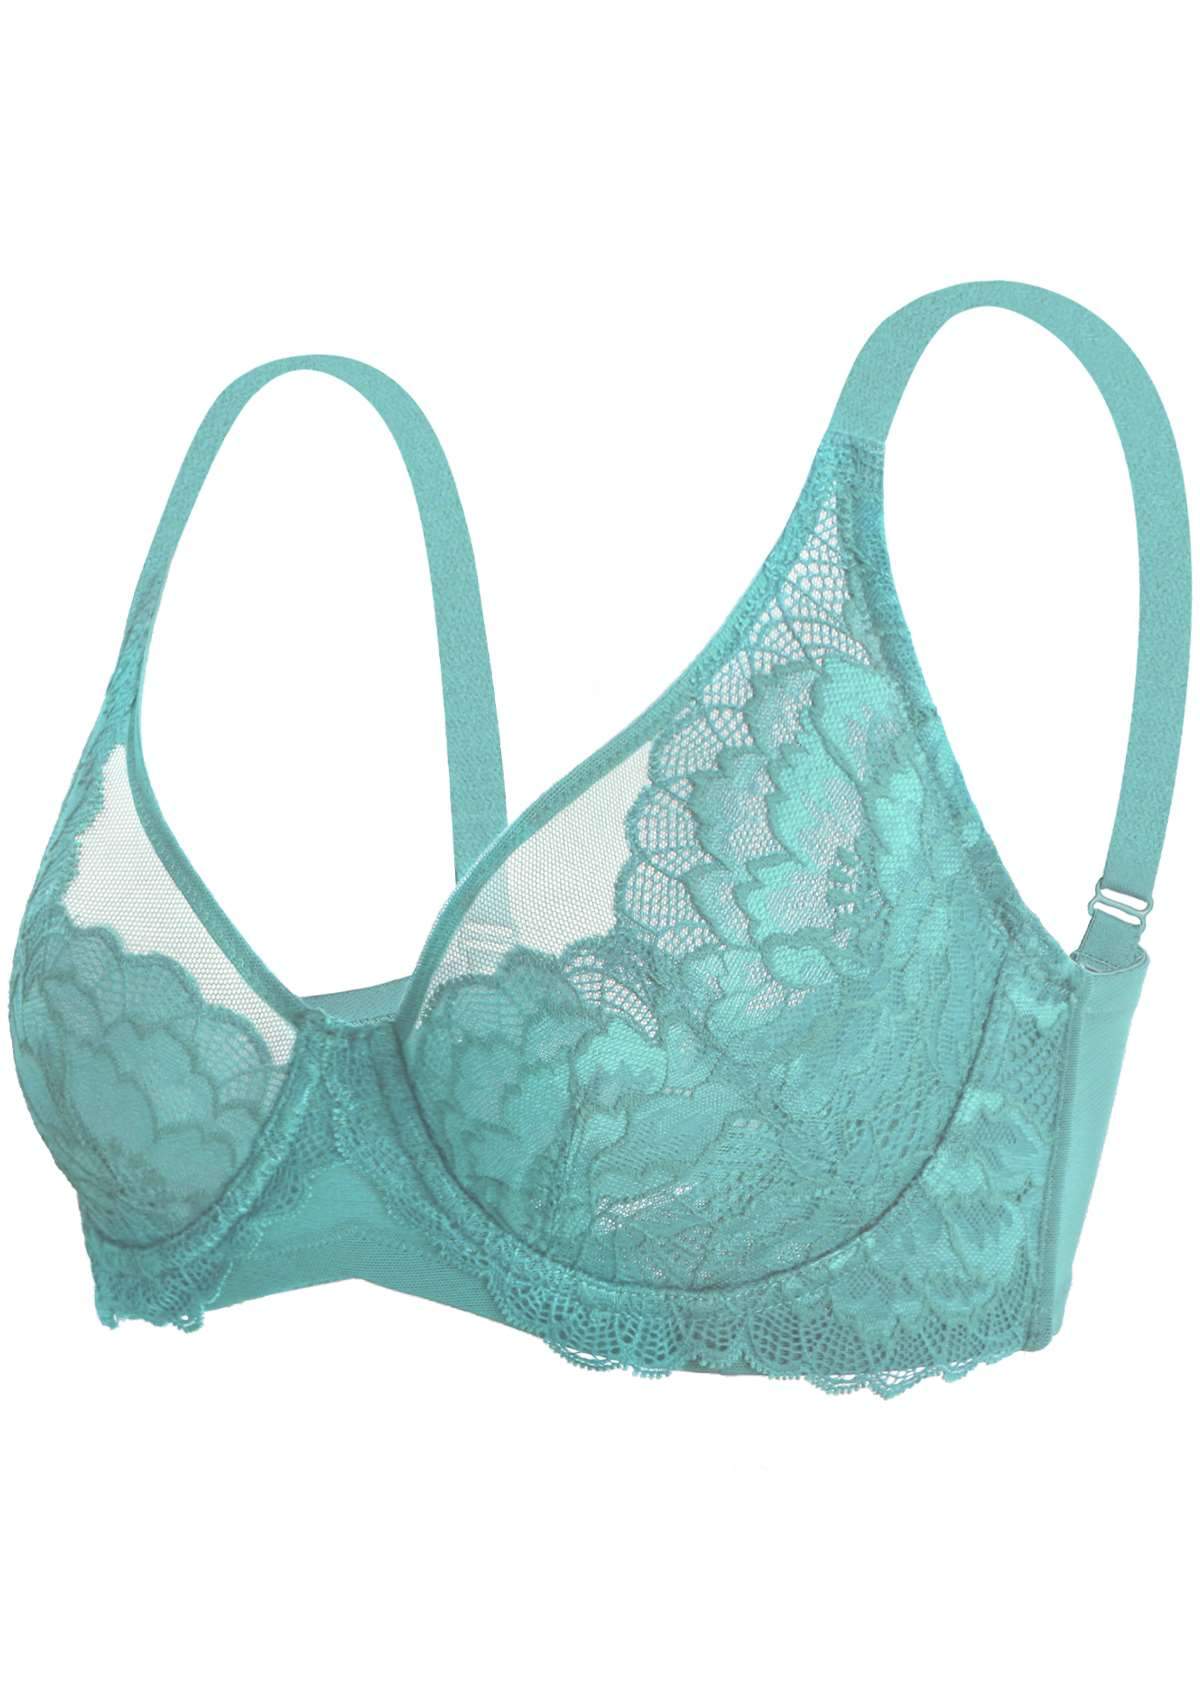 HSIA Peony Lace Unlined Supportive Underwire Bra - Green / 38 / DDD/F